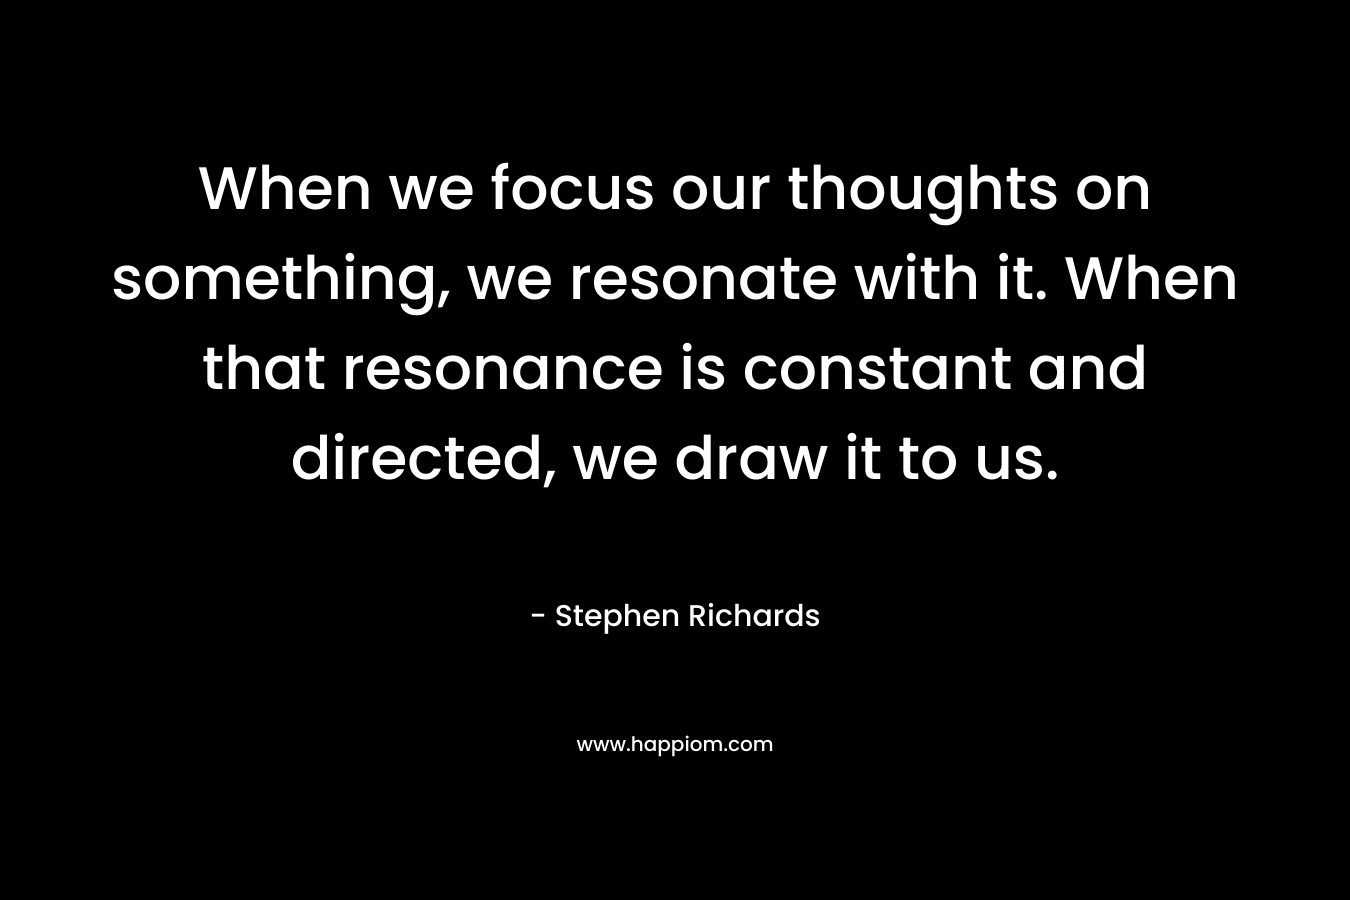 When we focus our thoughts on something, we resonate with it. When that resonance is constant and directed, we draw it to us. – Stephen Richards